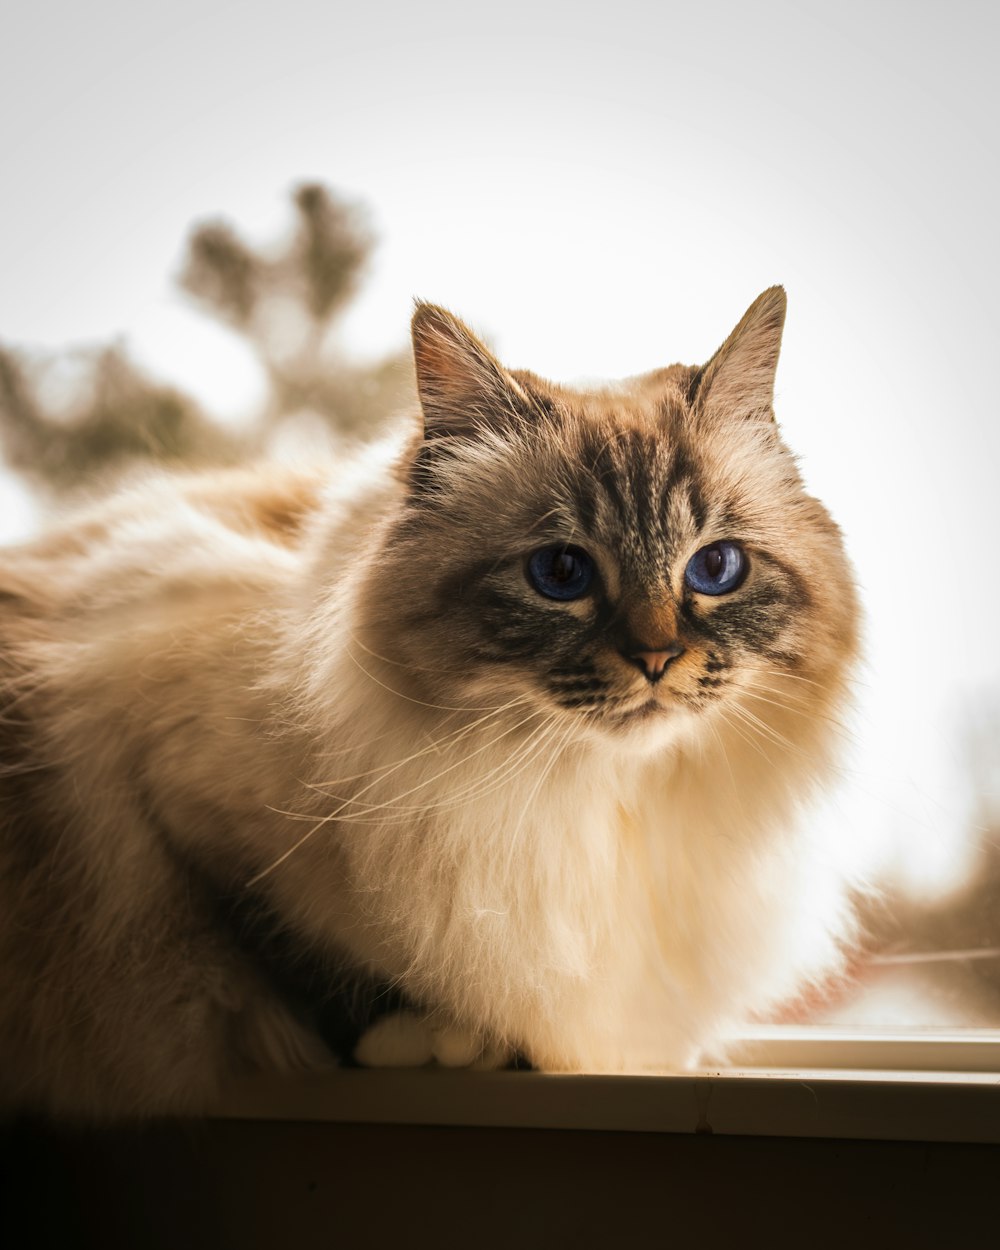 a cat sitting on a window sill looking at the camera